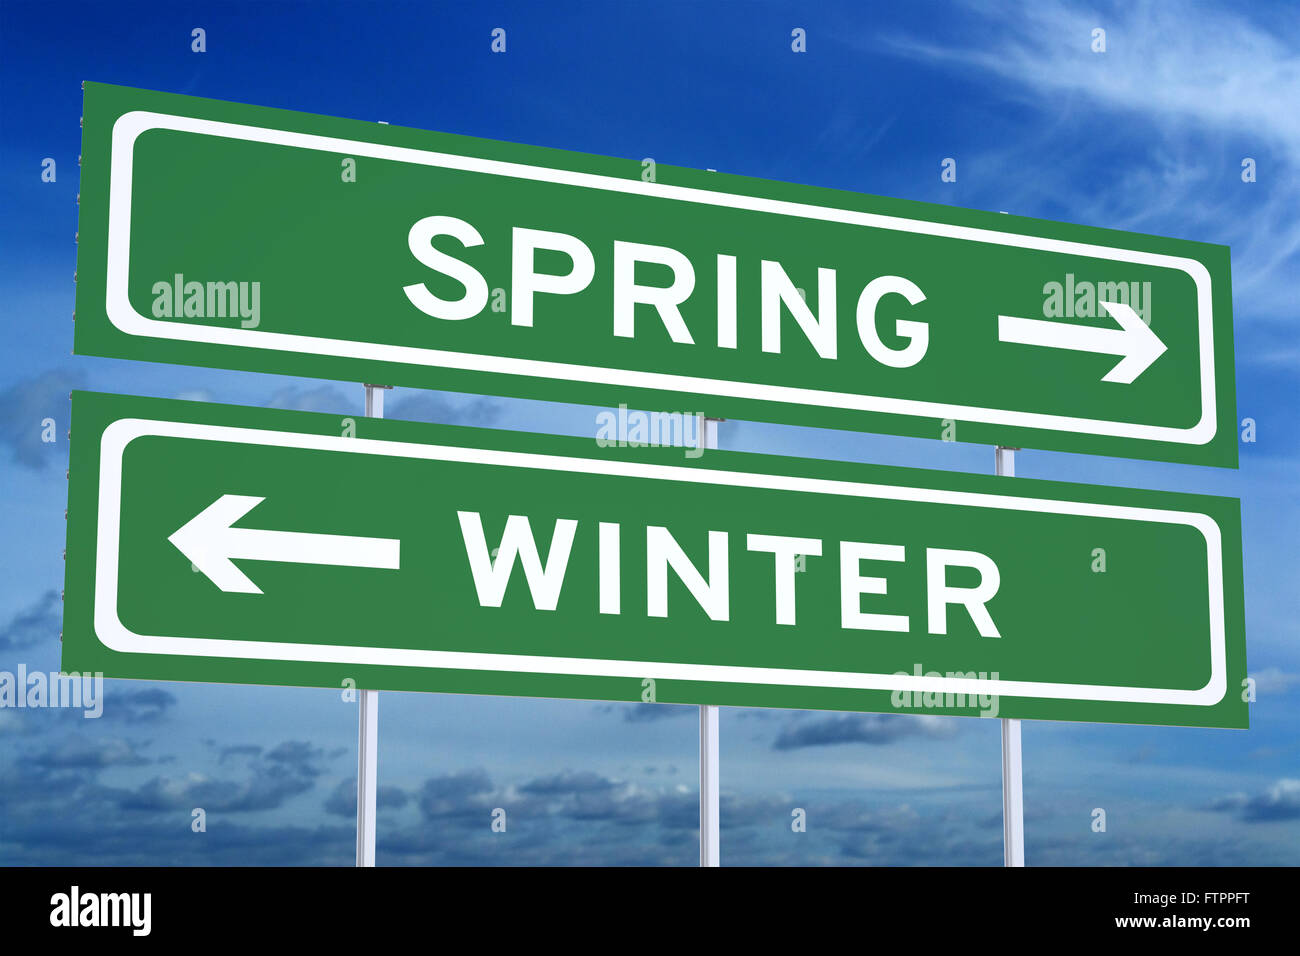 Spring or Winter concept on the road signpost, 3D rendering Stock Photo